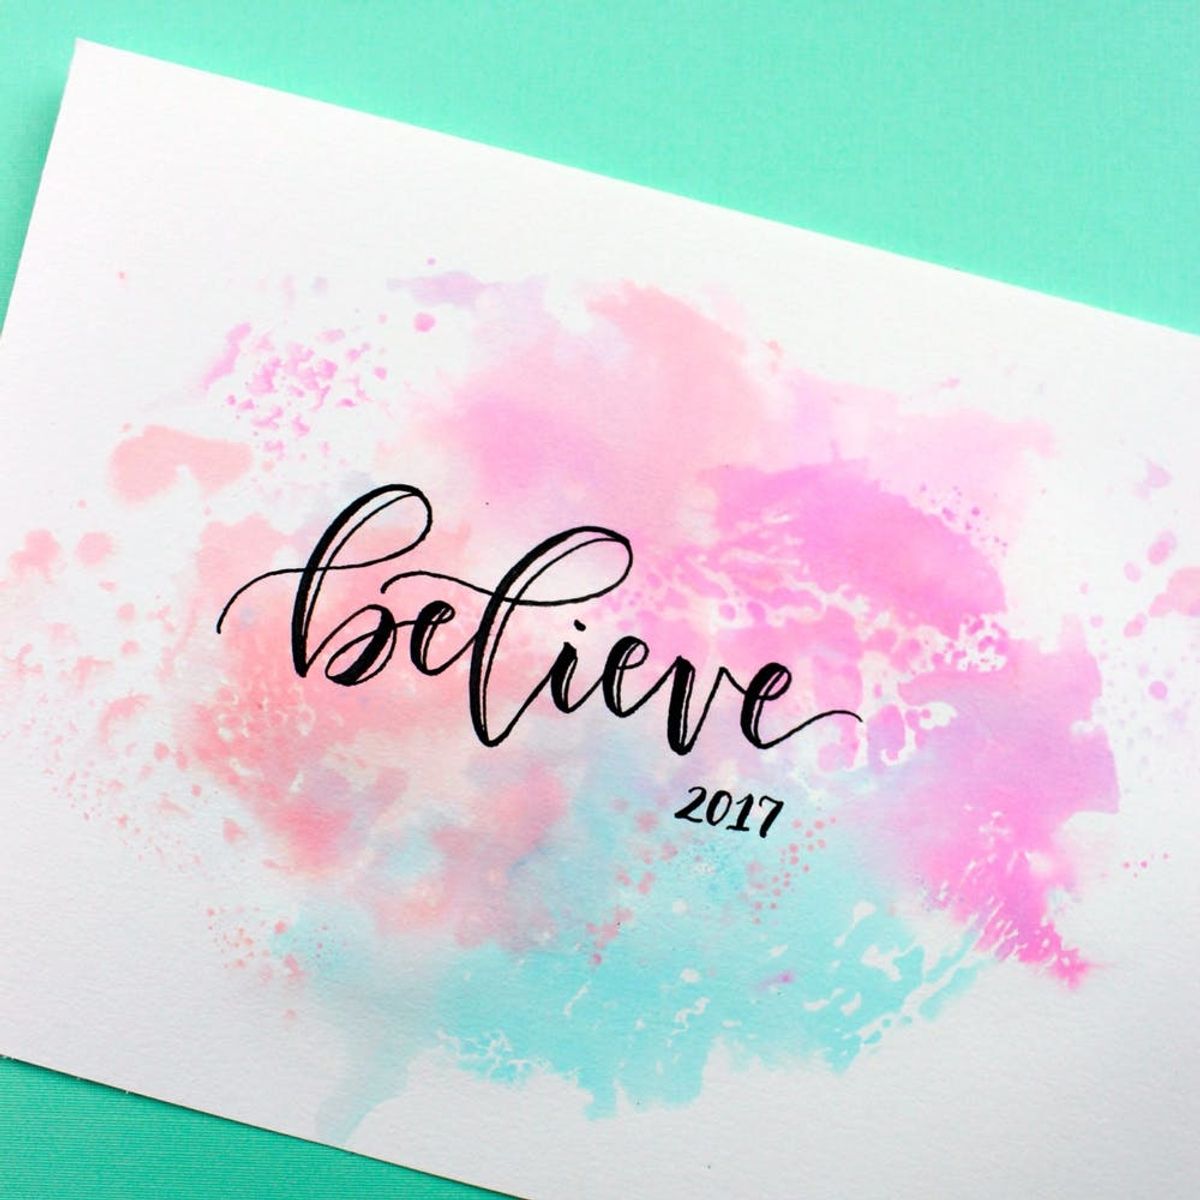 Kickstart Your Creativity With This Hand-Lettered Word of the Year Tutorial